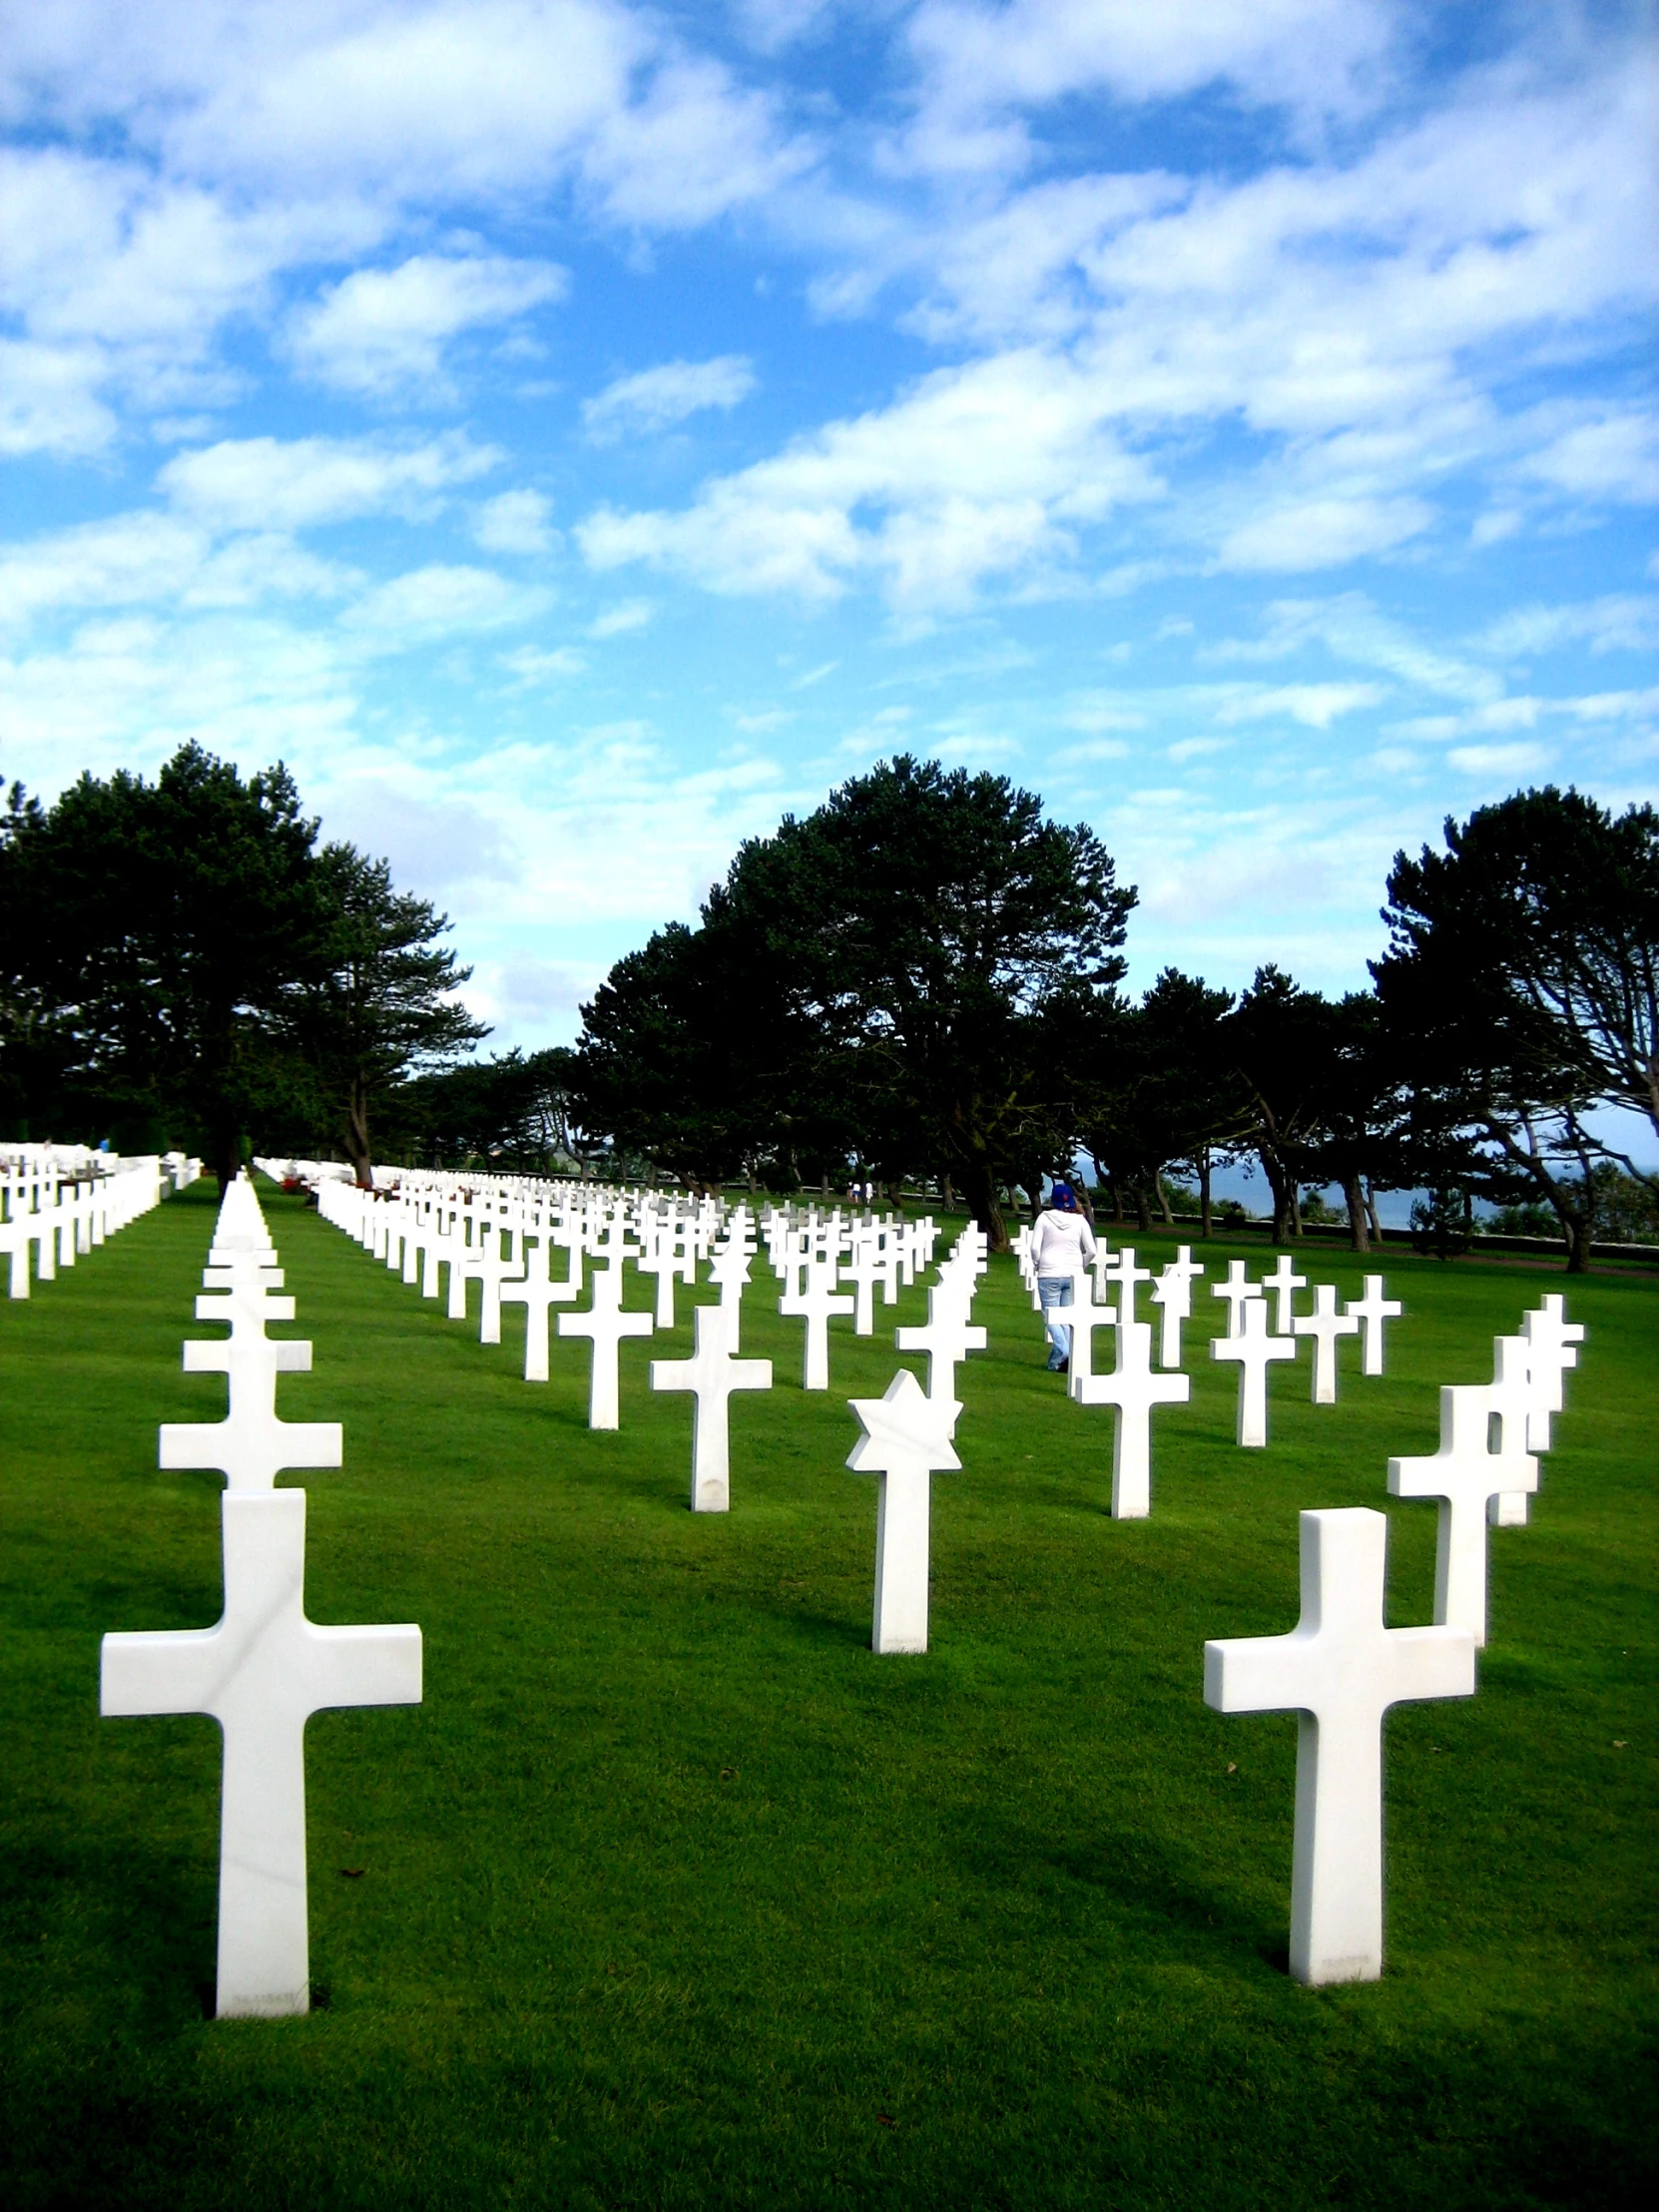 rows of white crosses in the middle of grass